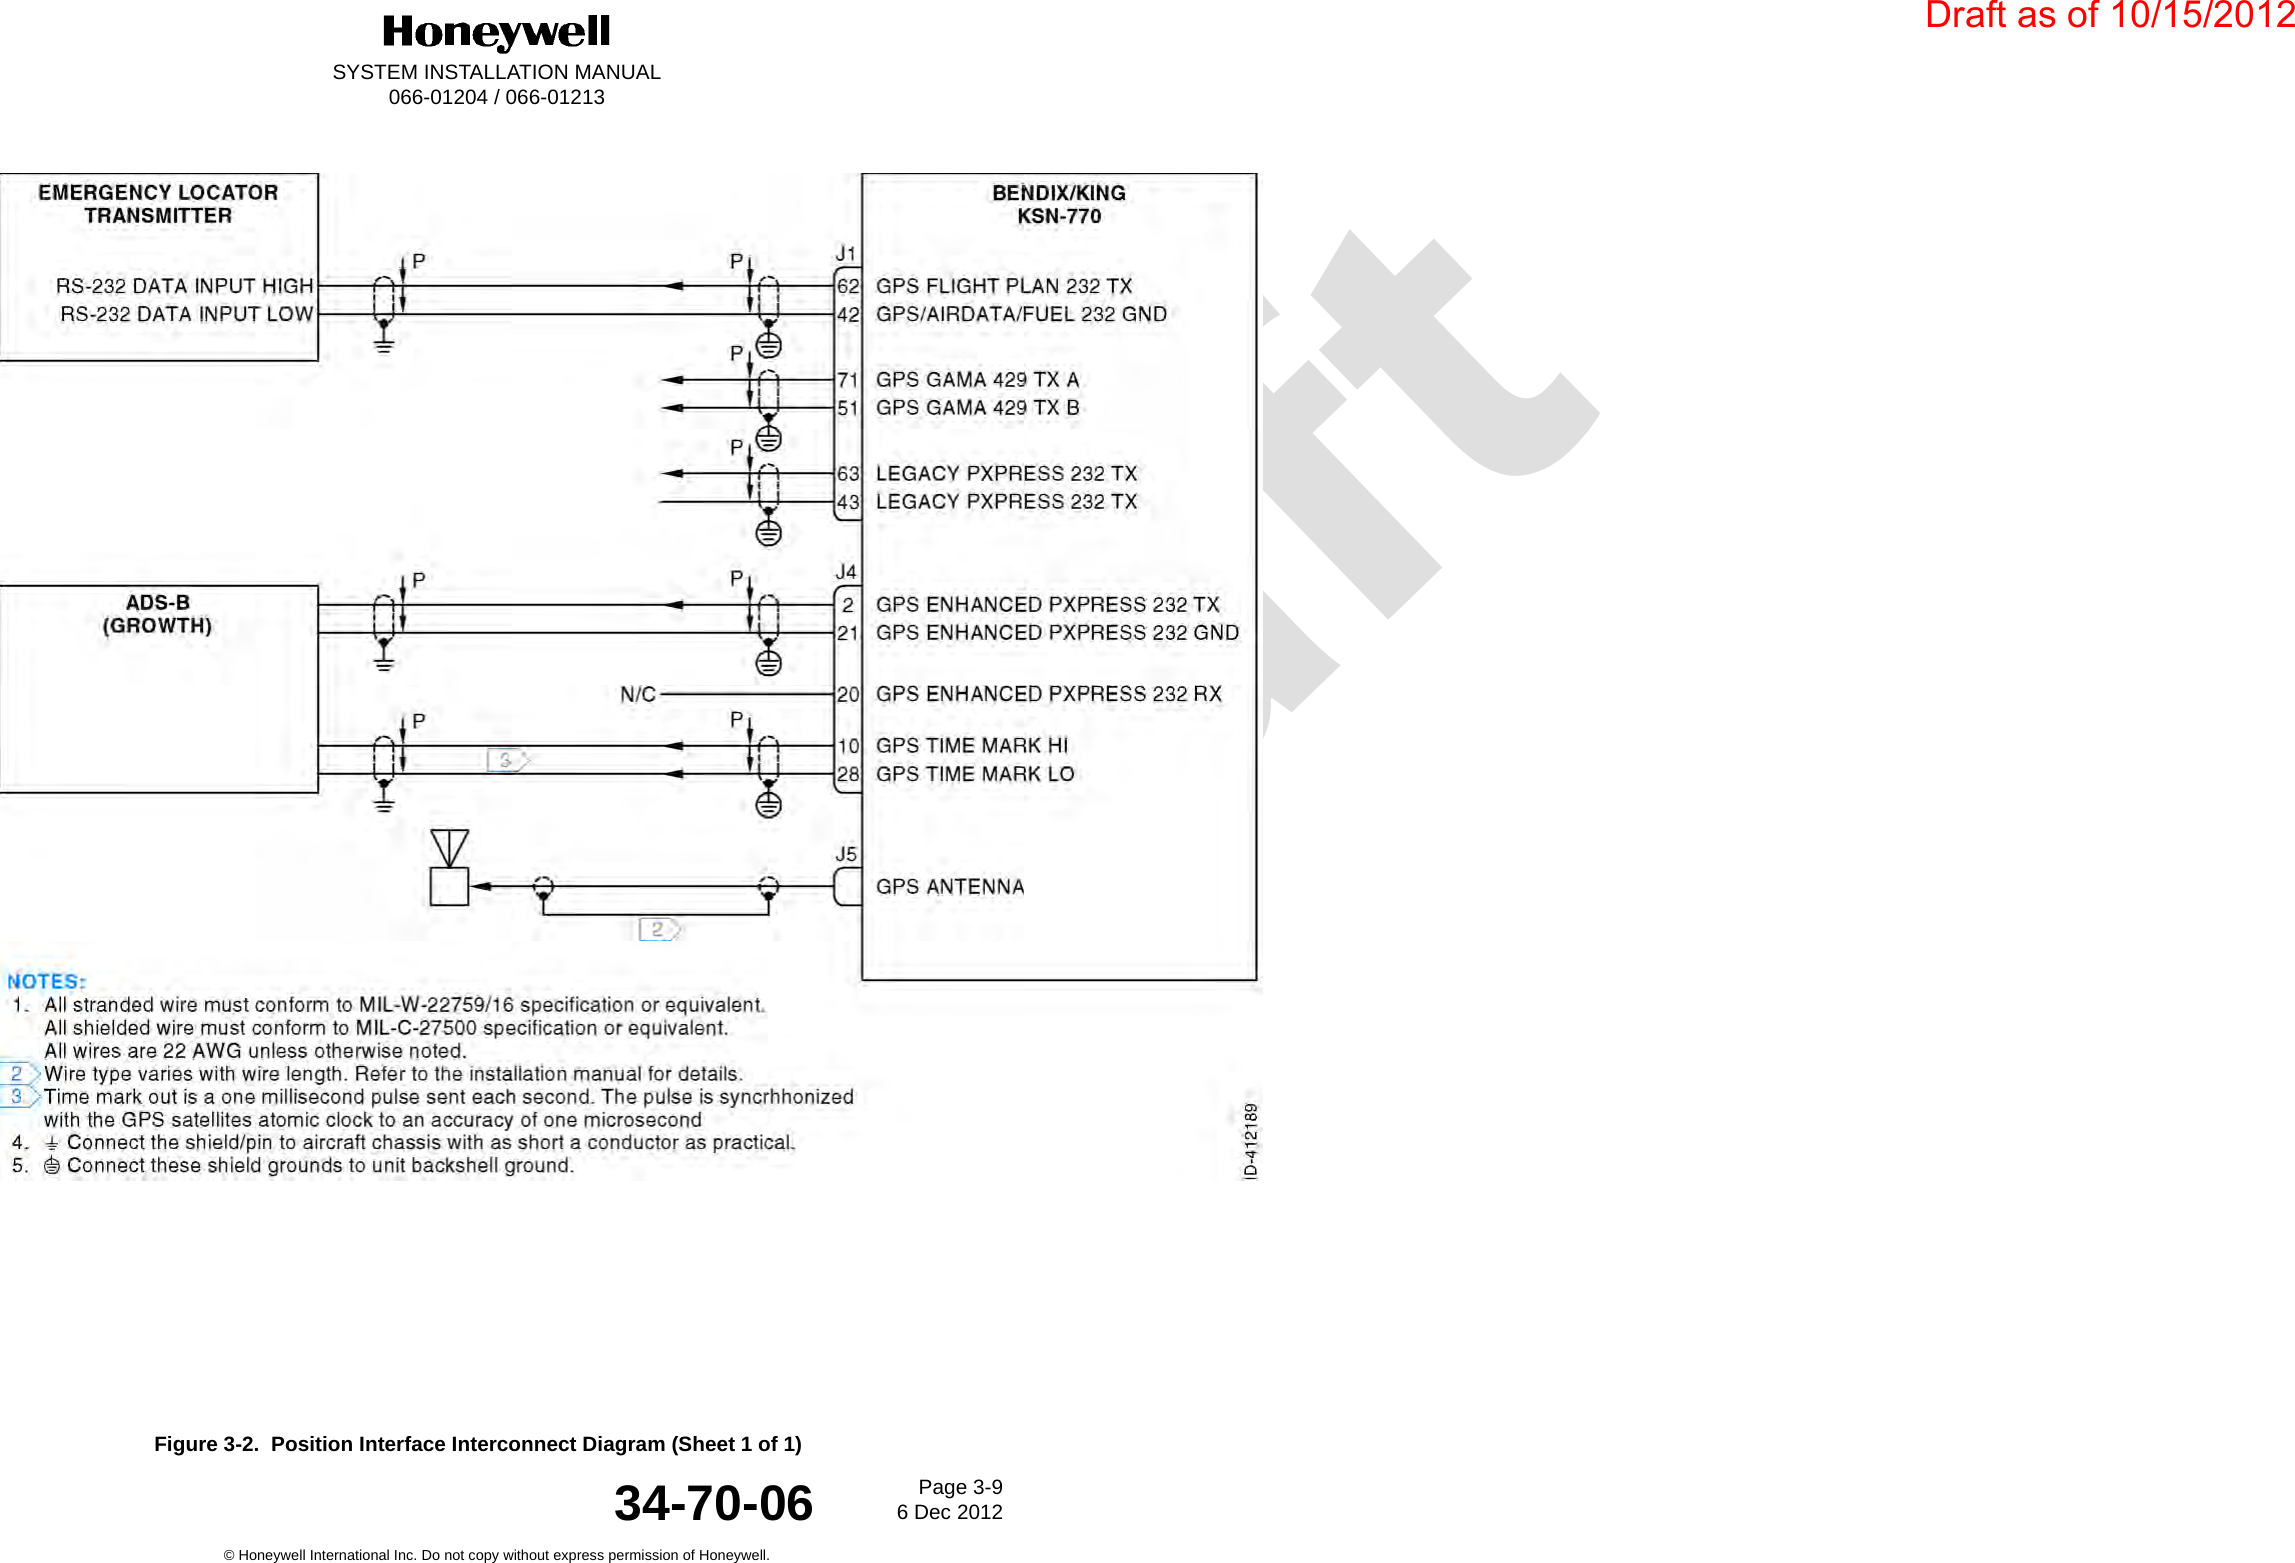 DraftSYSTEM INSTALLATION MANUAL066-01204 / 066-01213Page 3-96 Dec 2012© Honeywell International Inc. Do not copy without express permission of Honeywell.34-70-06Figure 3-2.  Position Interface Interconnect Diagram (Sheet 1 of 1)Draft as of 10/15/2012